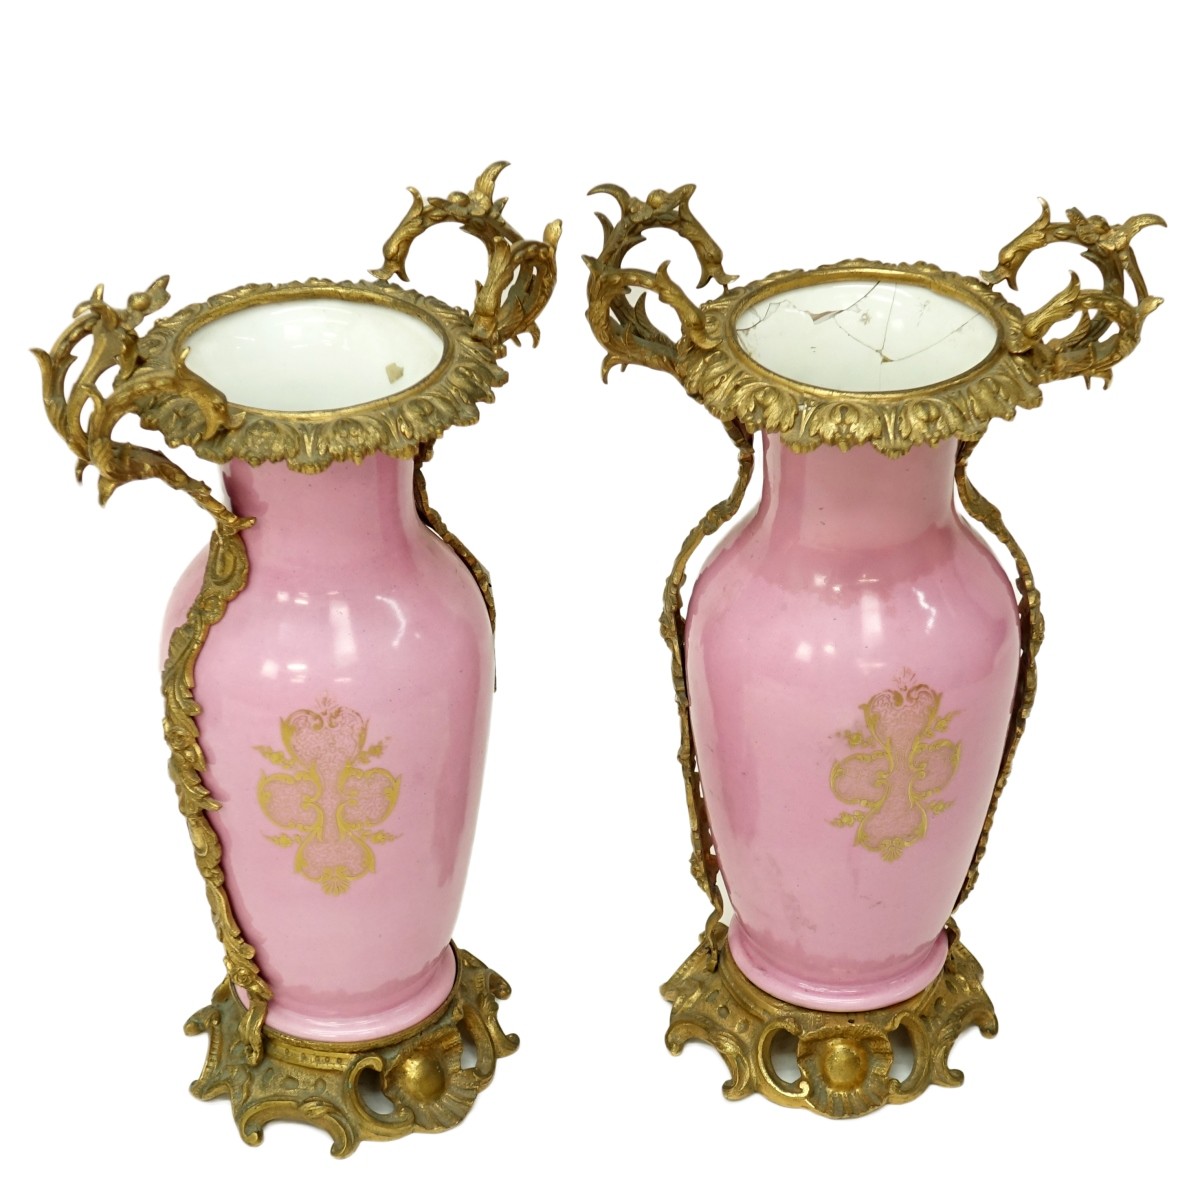 French Sevres Style Vases